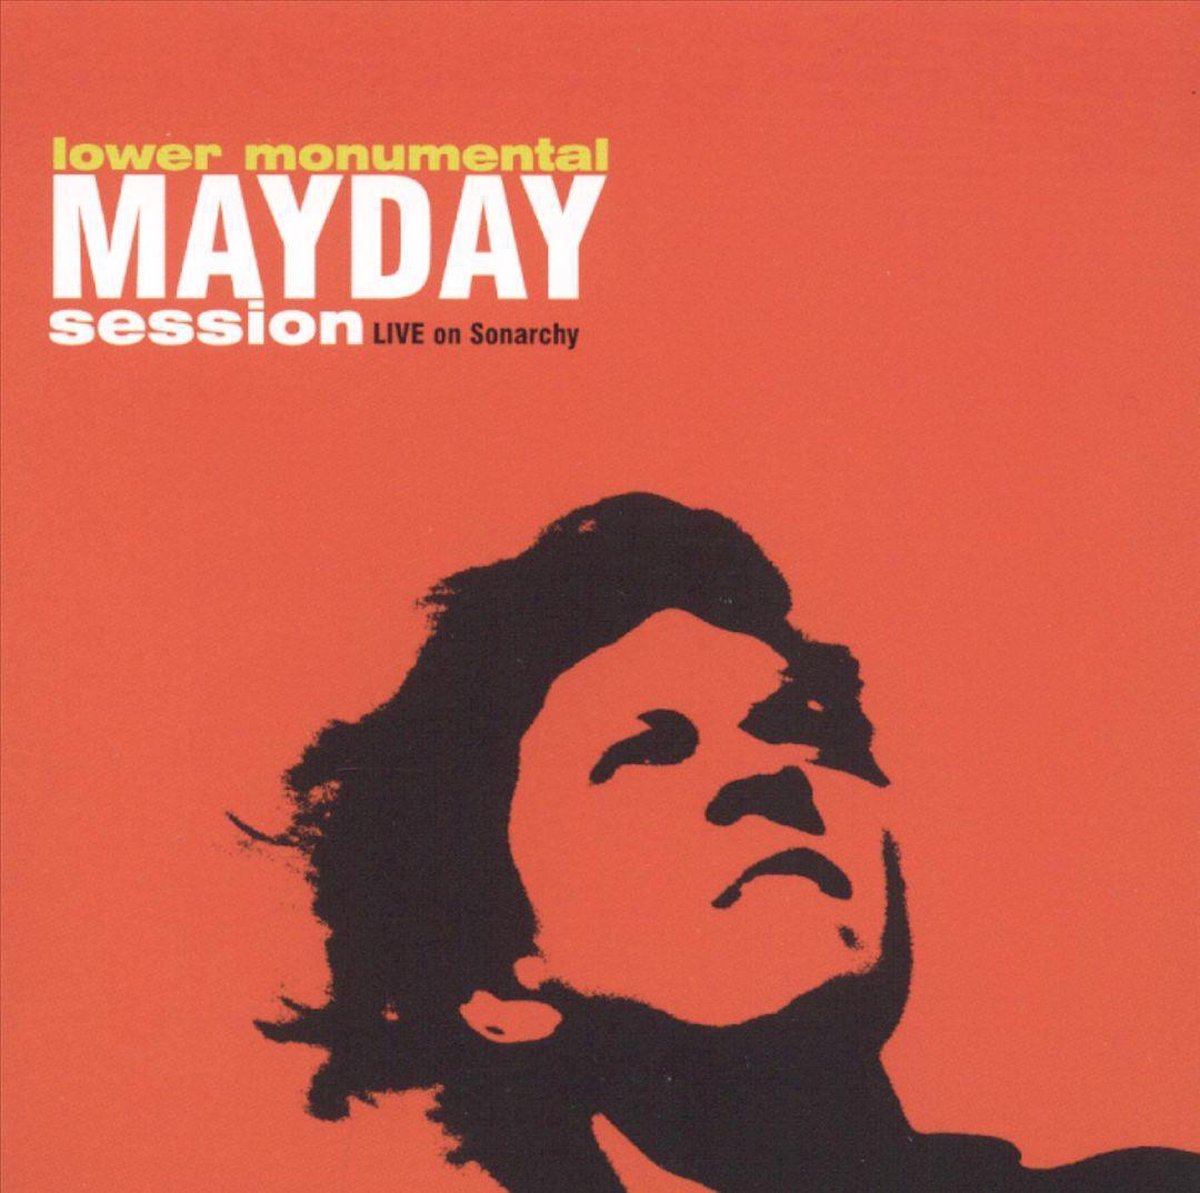 Mayday Session - Lower Monumental